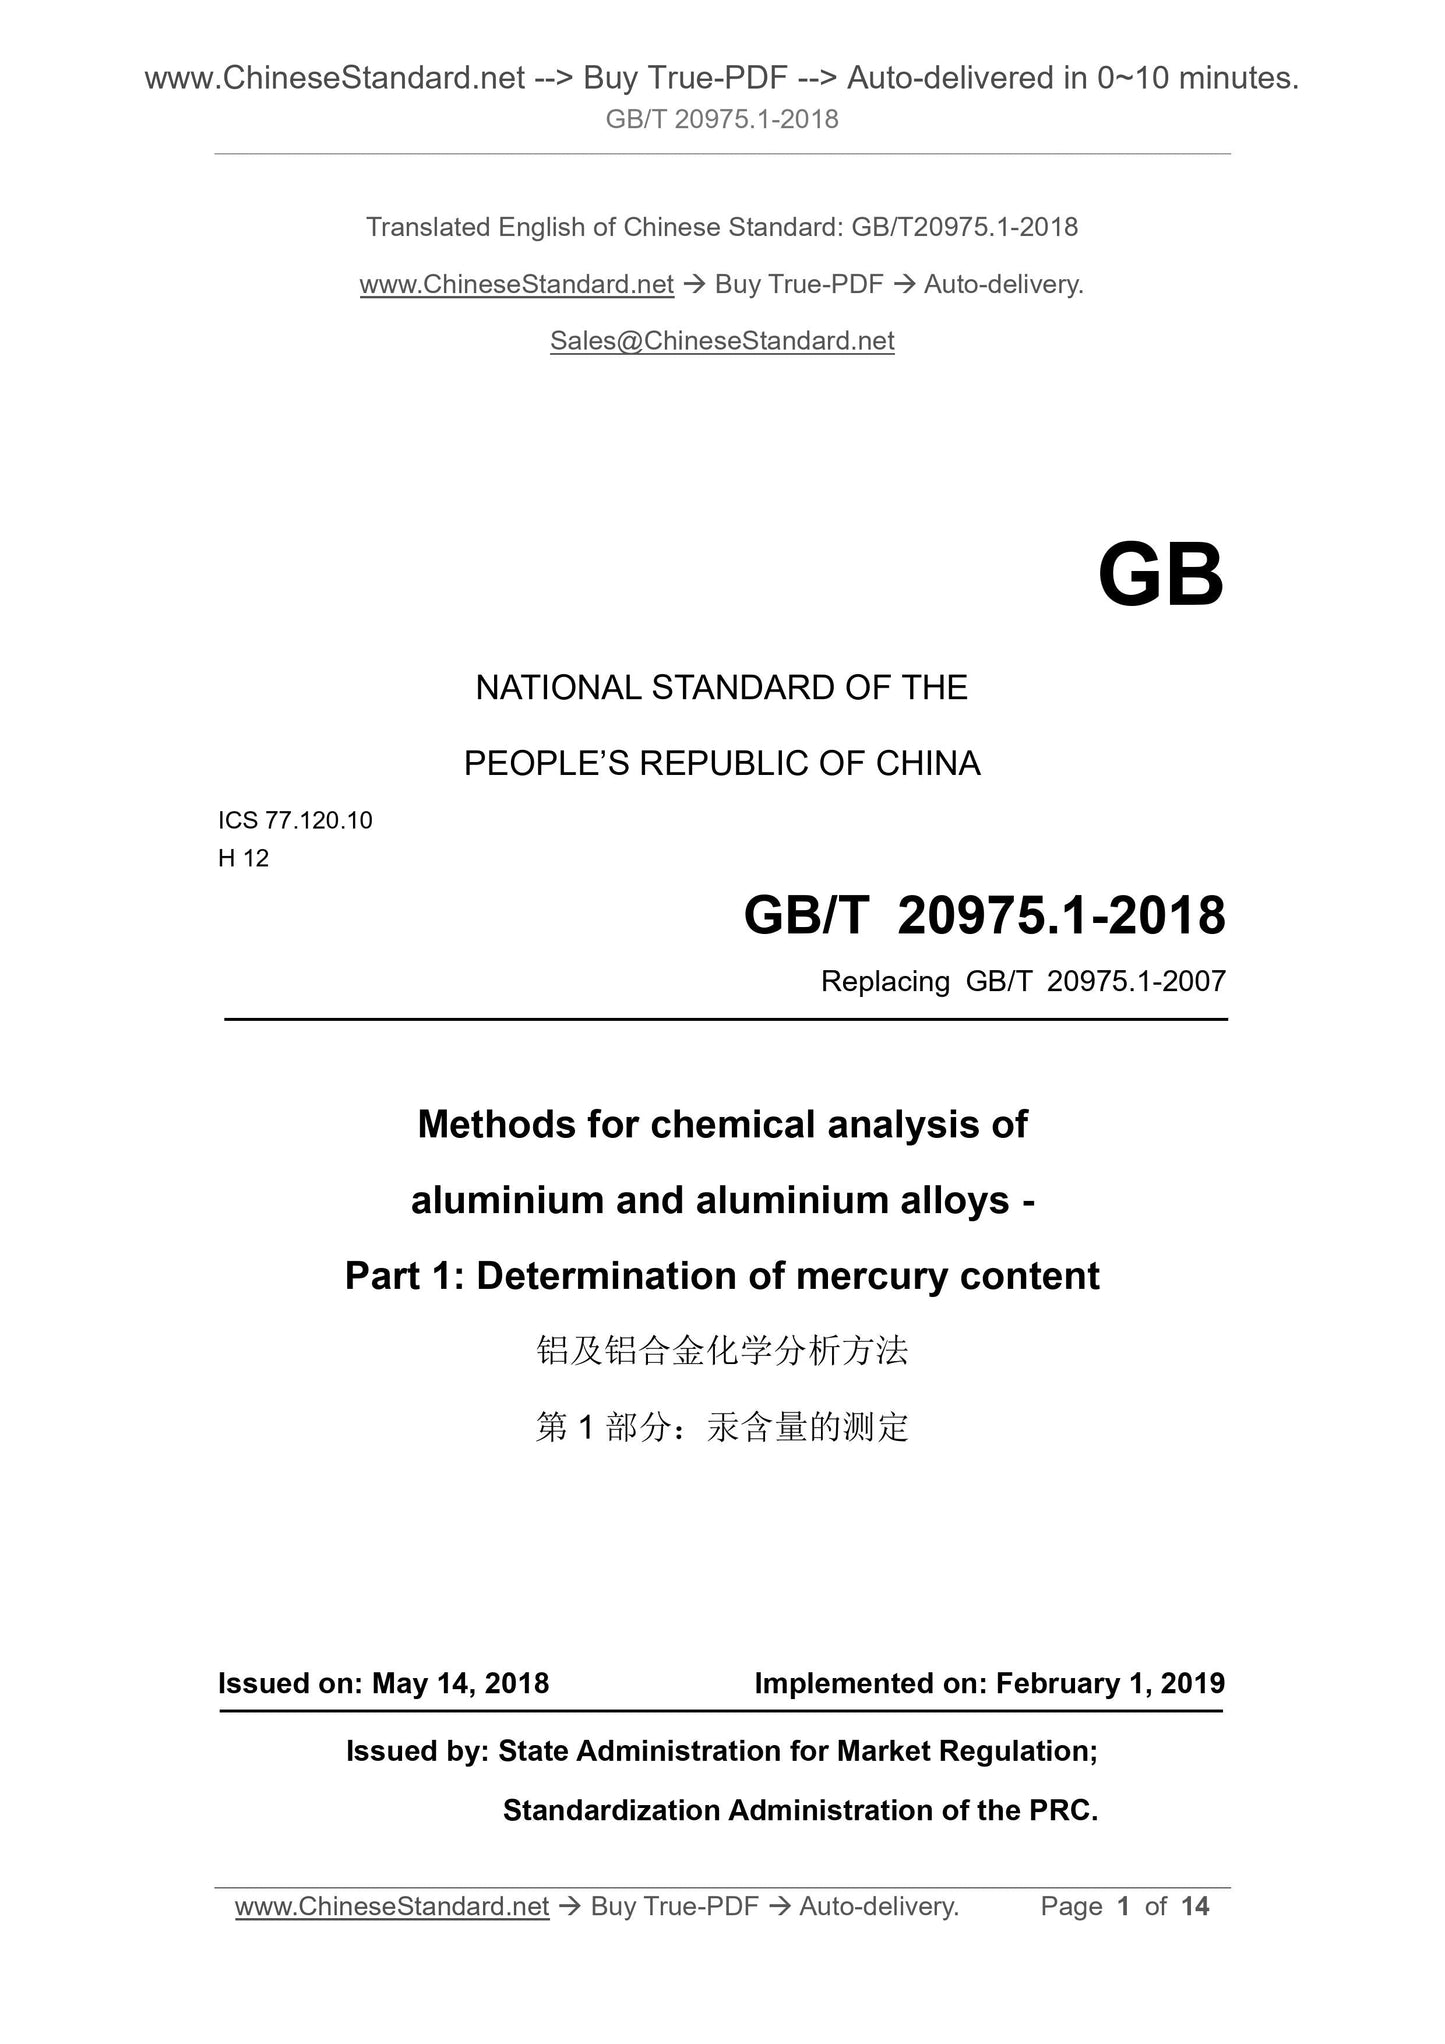 GB/T 20975.1-2018 Page 1